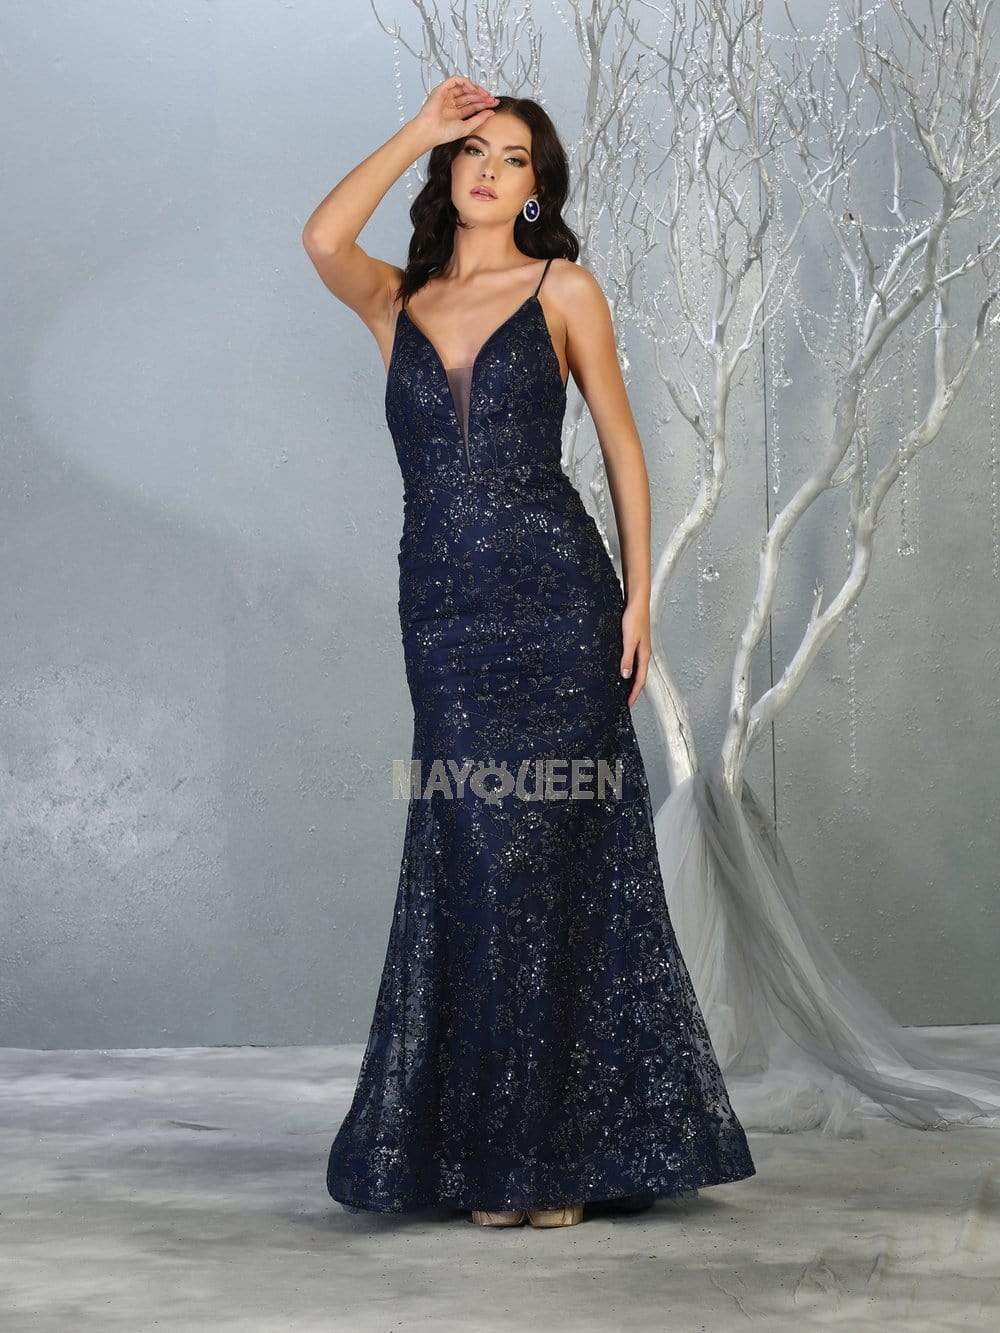 May Queen - MQ1752 Bead Embellished Plunging V-Neck Dress Prom Dresses 4 / Navy